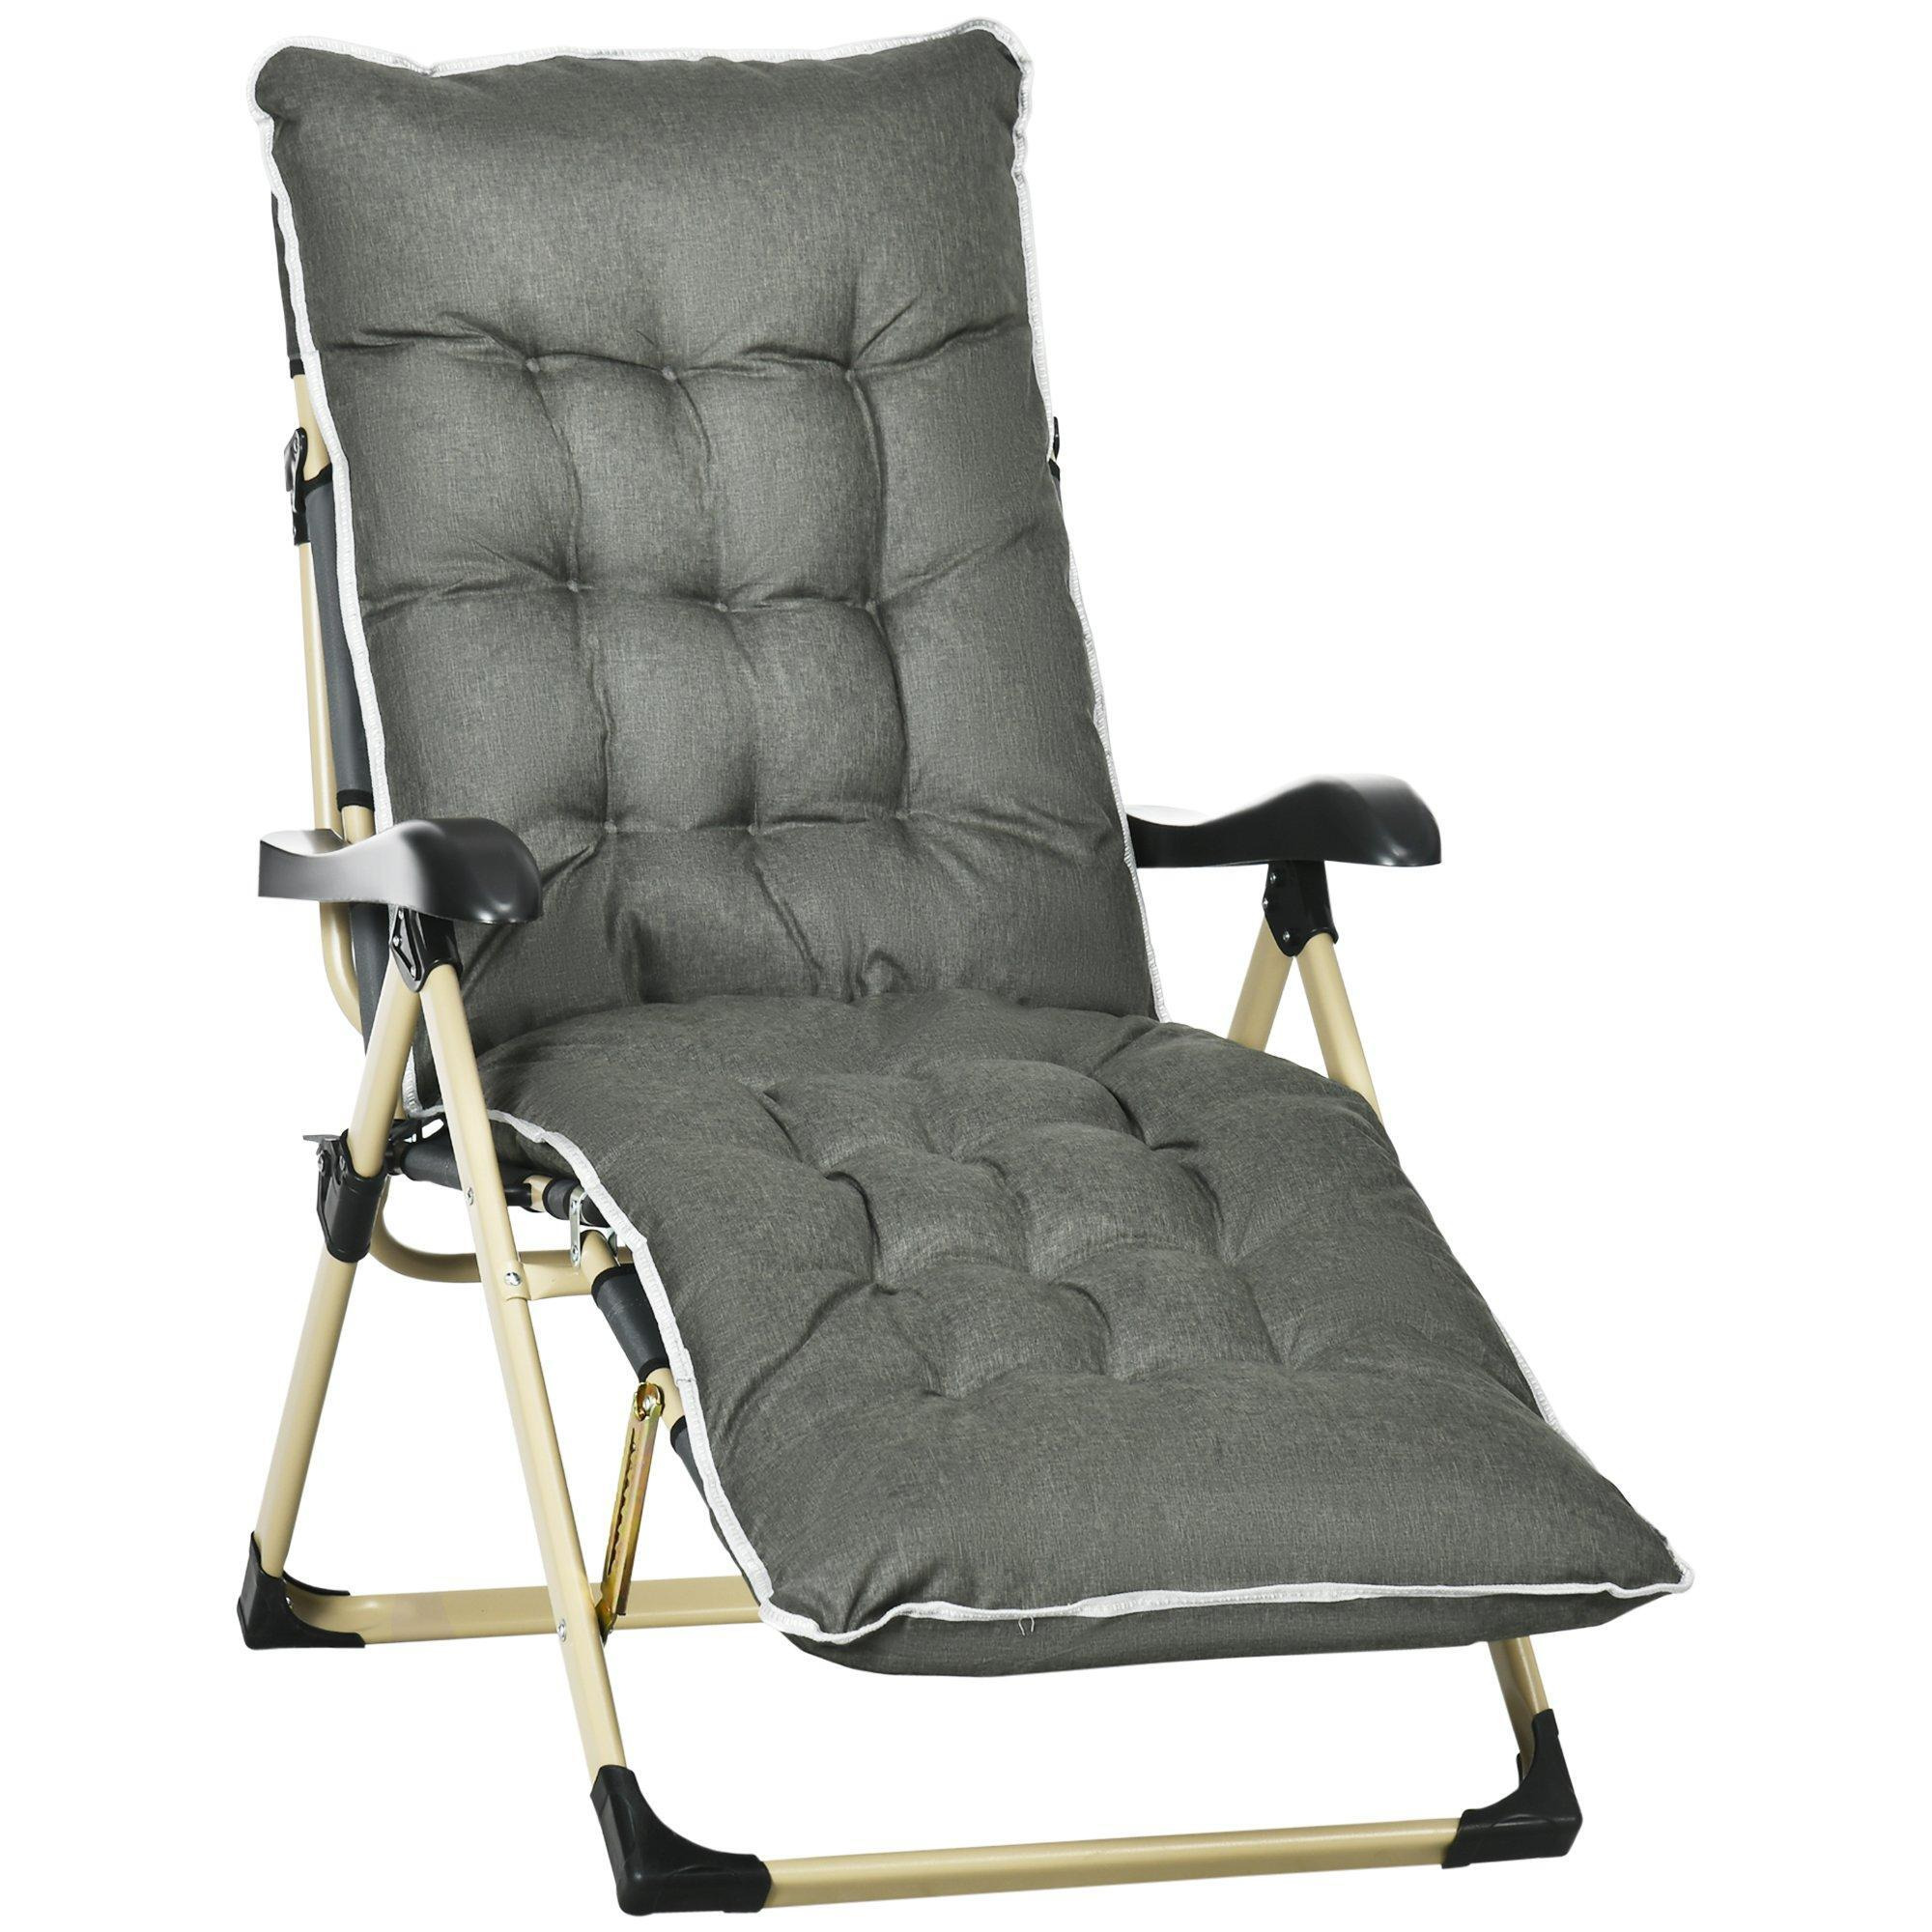 Outdoor Folding Reclining Lounge Chair Patio Lounger, Adjustable Back Footrest - image 1